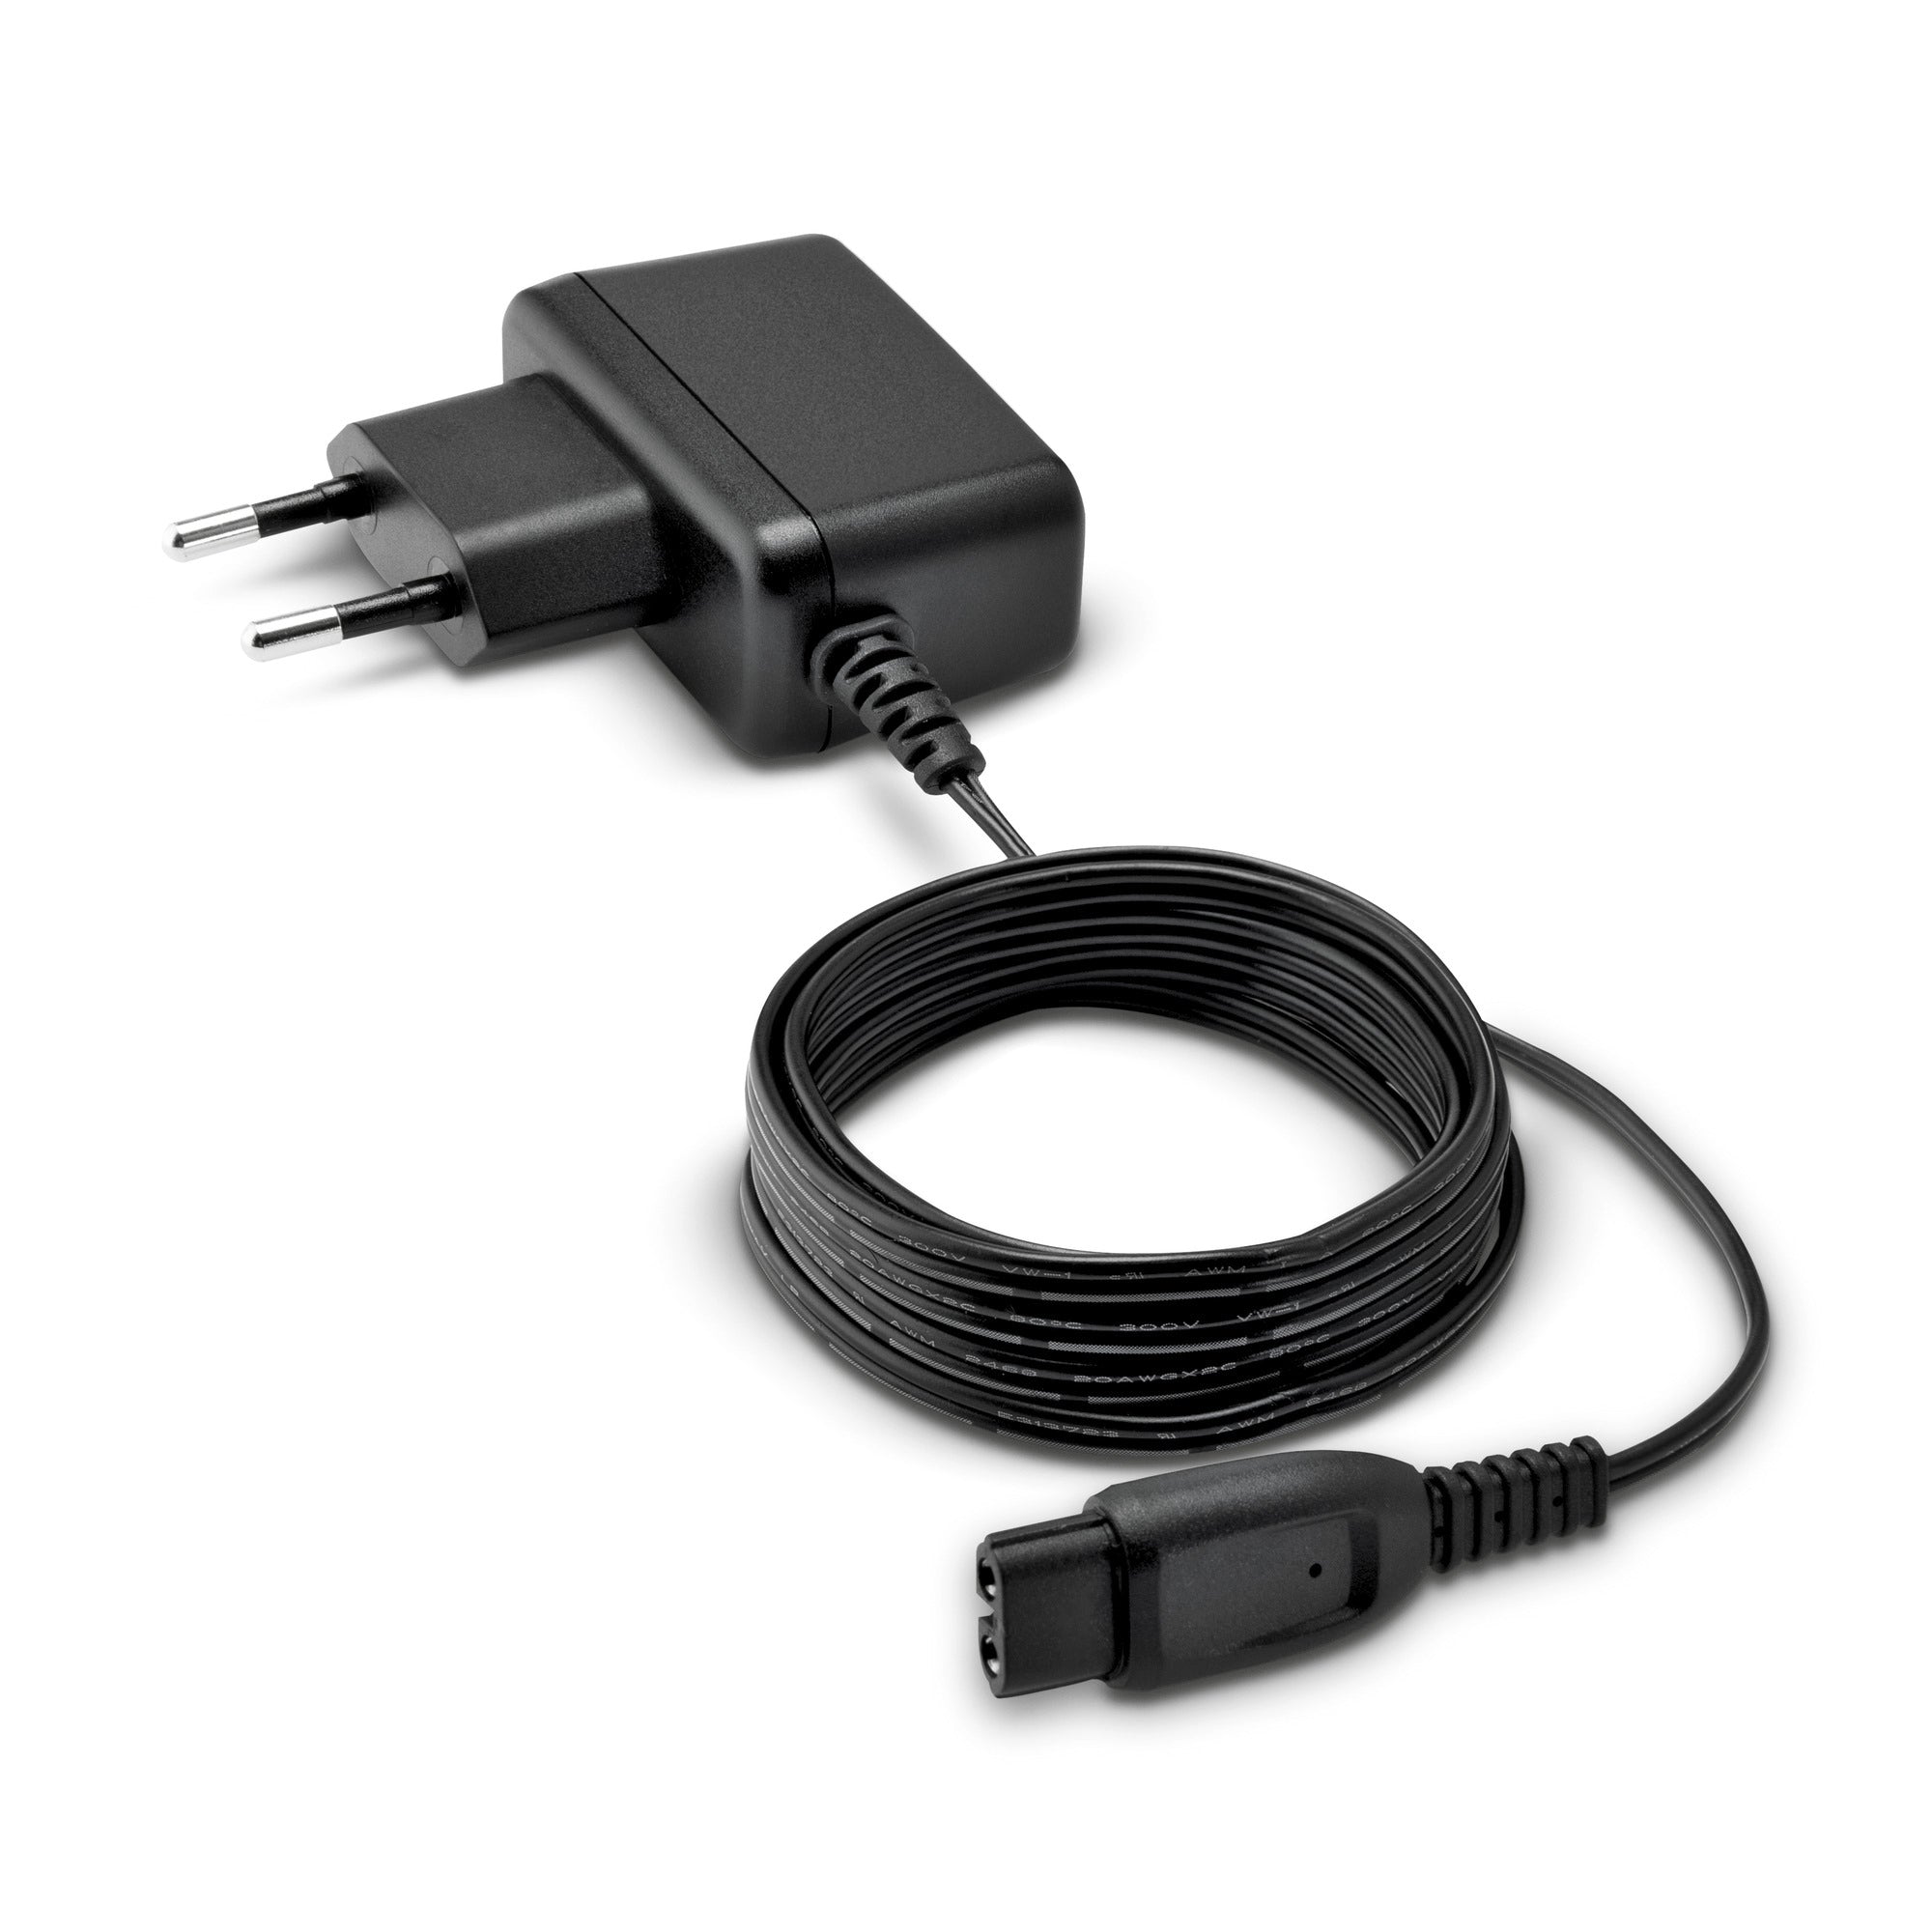 Kärcher quick charger WV 6